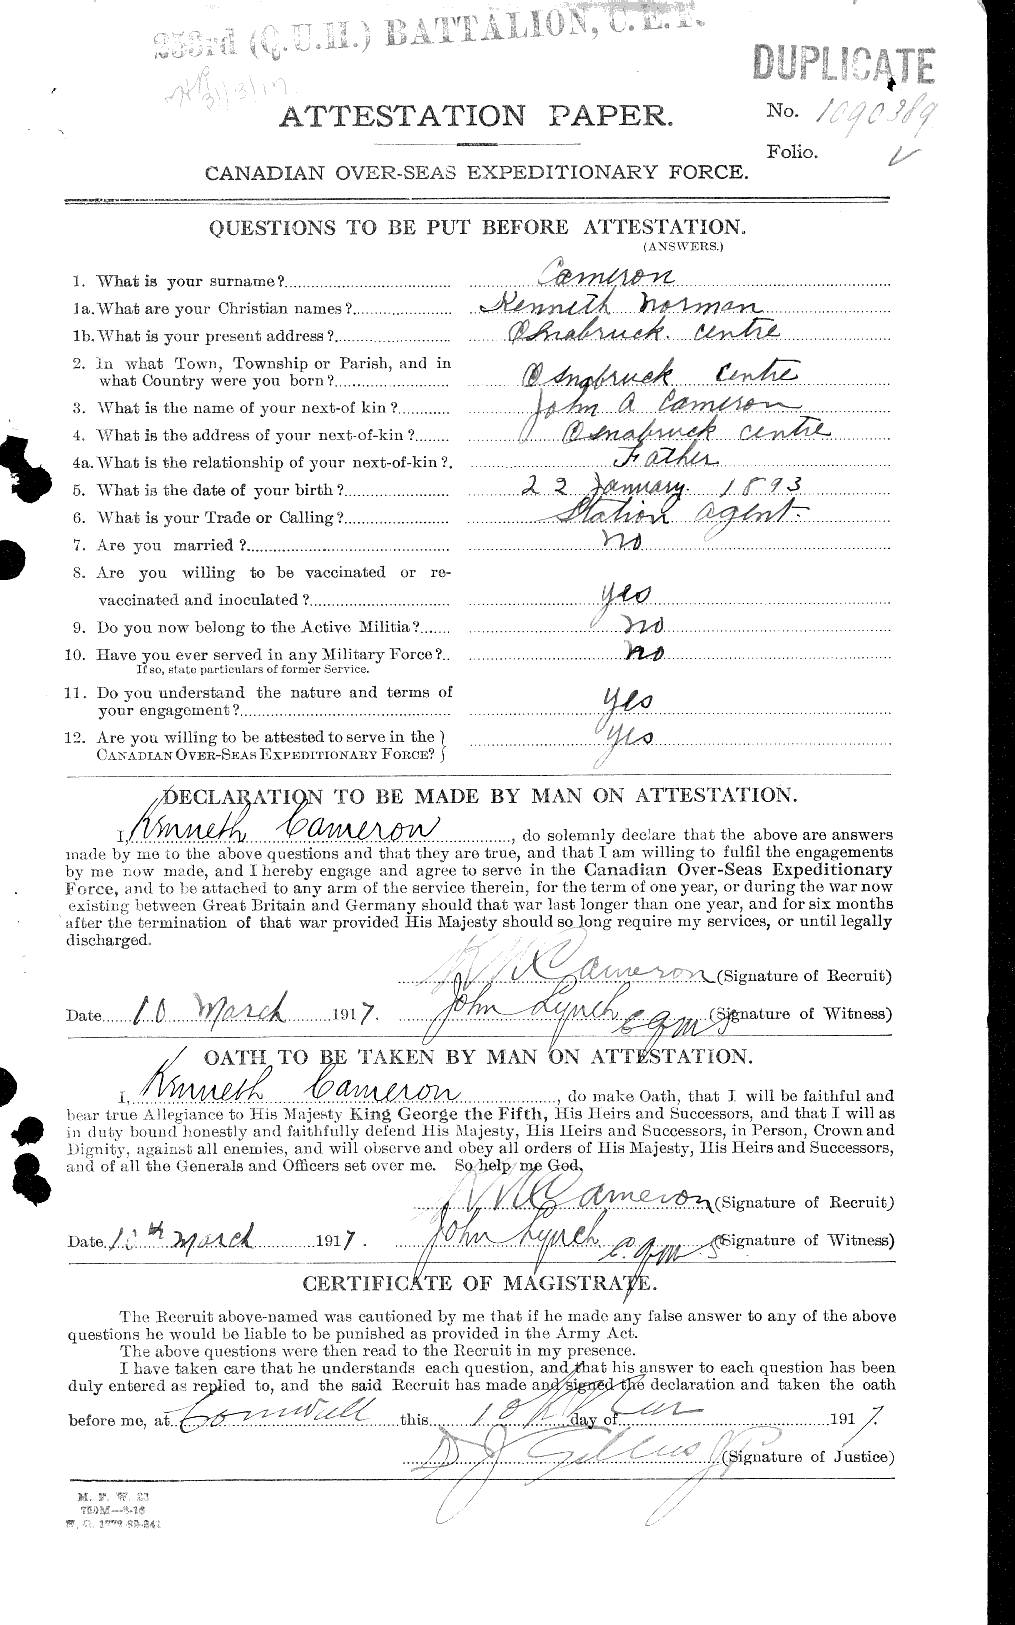 Personnel Records of the First World War - CEF 002377a